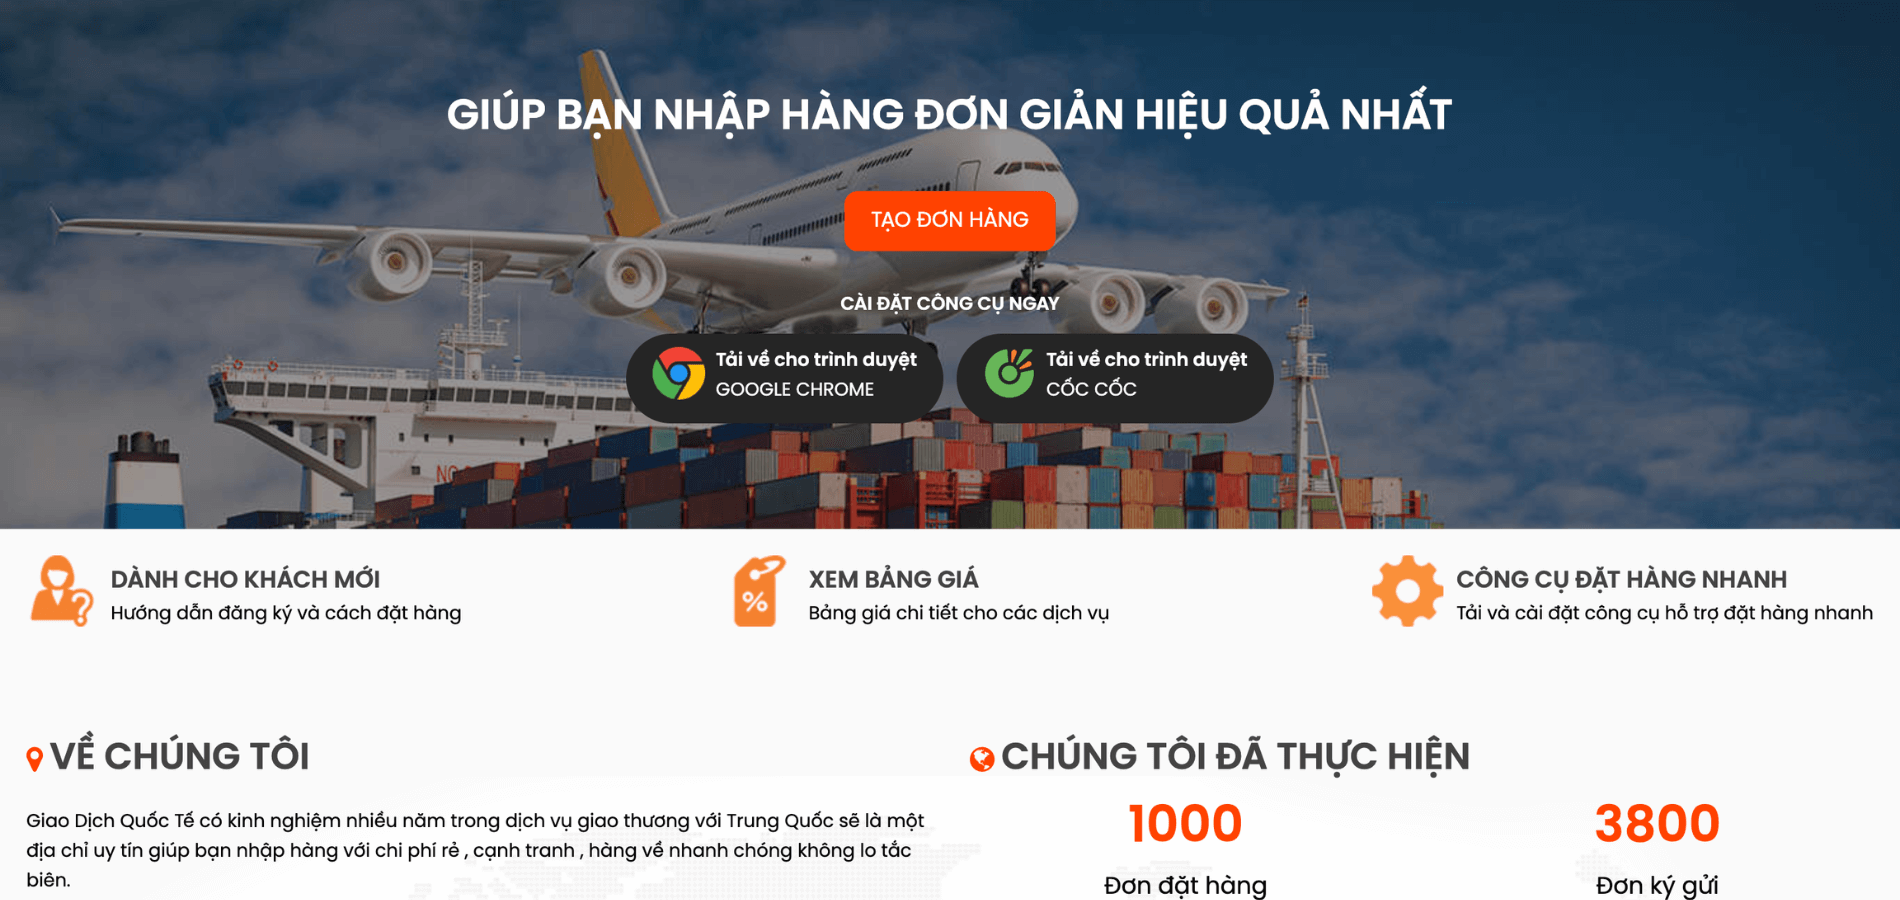 Giao dịch quốc tế